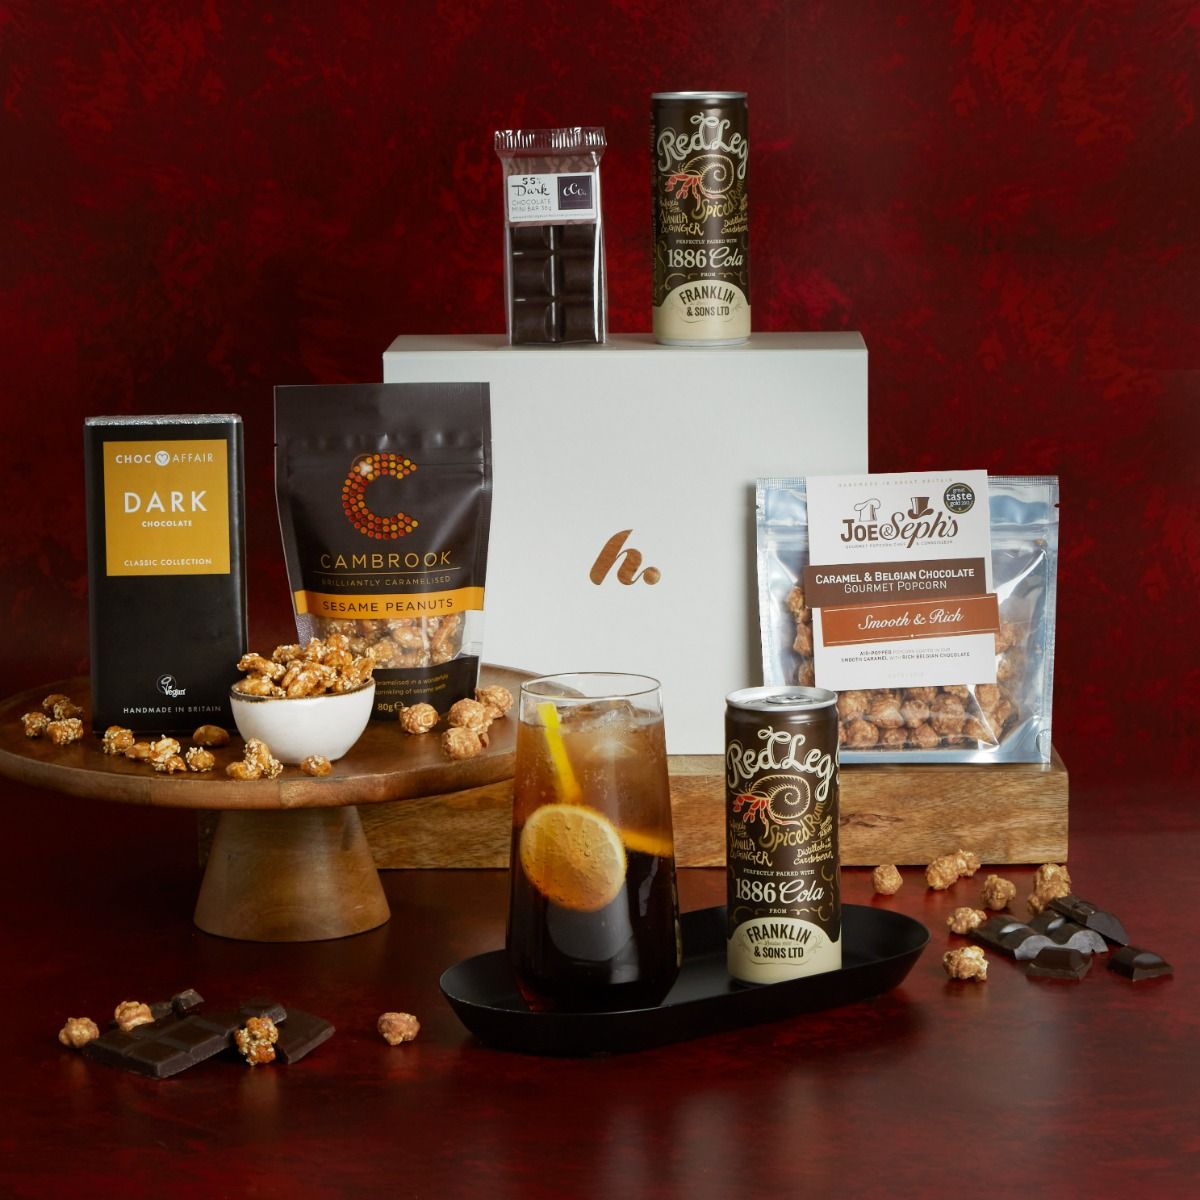 Rum & Treat Hamper with contents on display